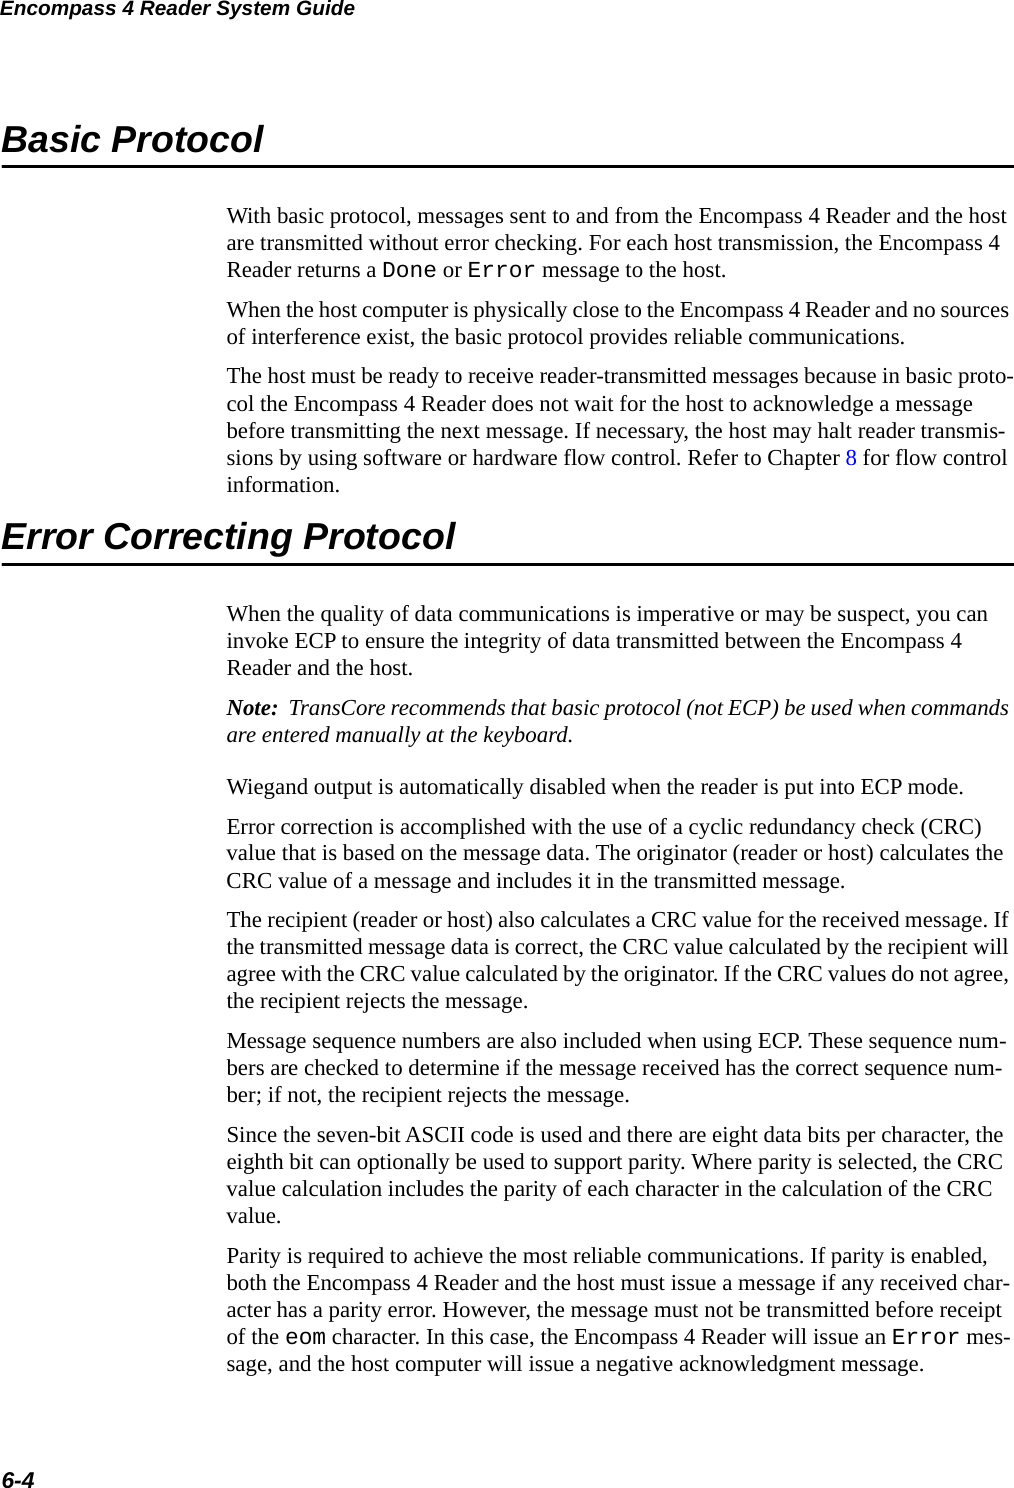 Encompass 4 Reader System Guide6-4Basic ProtocolWith basic protocol, messages sent to and from the Encompass 4 Reader and the host are transmitted without error checking. For each host transmission, the Encompass 4 Reader returns a Done or Error message to the host.When the host computer is physically close to the Encompass 4 Reader and no sources of interference exist, the basic protocol provides reliable communications.The host must be ready to receive reader-transmitted messages because in basic proto-col the Encompass 4 Reader does not wait for the host to acknowledge a message before transmitting the next message. If necessary, the host may halt reader transmis-sions by using software or hardware flow control. Refer to Chapter 8 for flow control information.Error Correcting ProtocolWhen the quality of data communications is imperative or may be suspect, you can invoke ECP to ensure the integrity of data transmitted between the Encompass 4 Reader and the host. Note:  TransCore recommends that basic protocol (not ECP) be used when commands are entered manually at the keyboard.Wiegand output is automatically disabled when the reader is put into ECP mode.Error correction is accomplished with the use of a cyclic redundancy check (CRC) value that is based on the message data. The originator (reader or host) calculates the CRC value of a message and includes it in the transmitted message.The recipient (reader or host) also calculates a CRC value for the received message. If the transmitted message data is correct, the CRC value calculated by the recipient will agree with the CRC value calculated by the originator. If the CRC values do not agree, the recipient rejects the message.Message sequence numbers are also included when using ECP. These sequence num-bers are checked to determine if the message received has the correct sequence num-ber; if not, the recipient rejects the message.Since the seven-bit ASCII code is used and there are eight data bits per character, the eighth bit can optionally be used to support parity. Where parity is selected, the CRC value calculation includes the parity of each character in the calculation of the CRC value.Parity is required to achieve the most reliable communications. If parity is enabled, both the Encompass 4 Reader and the host must issue a message if any received char-acter has a parity error. However, the message must not be transmitted before receipt of the eom character. In this case, the Encompass 4 Reader will issue an Error mes-sage, and the host computer will issue a negative acknowledgment message.